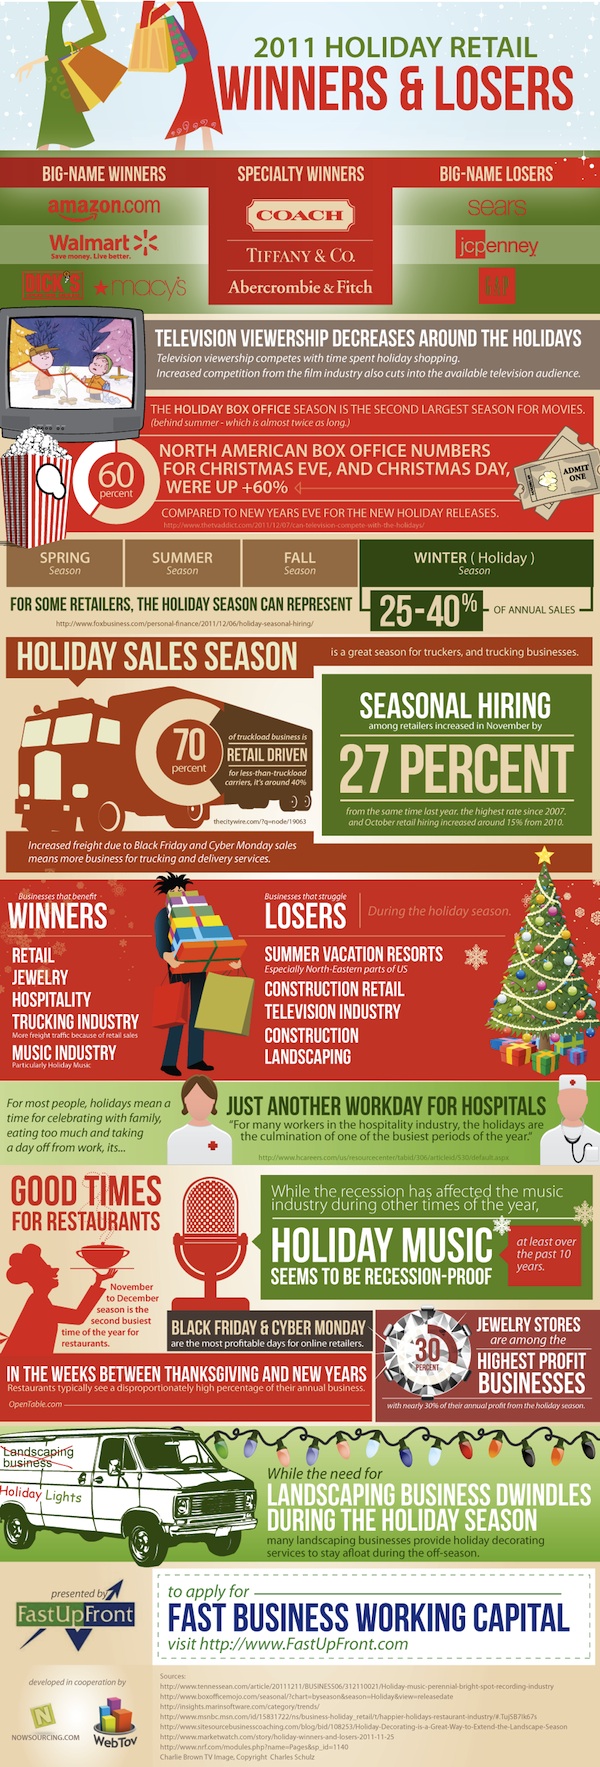 Holiday Retail Winners and Losers 1